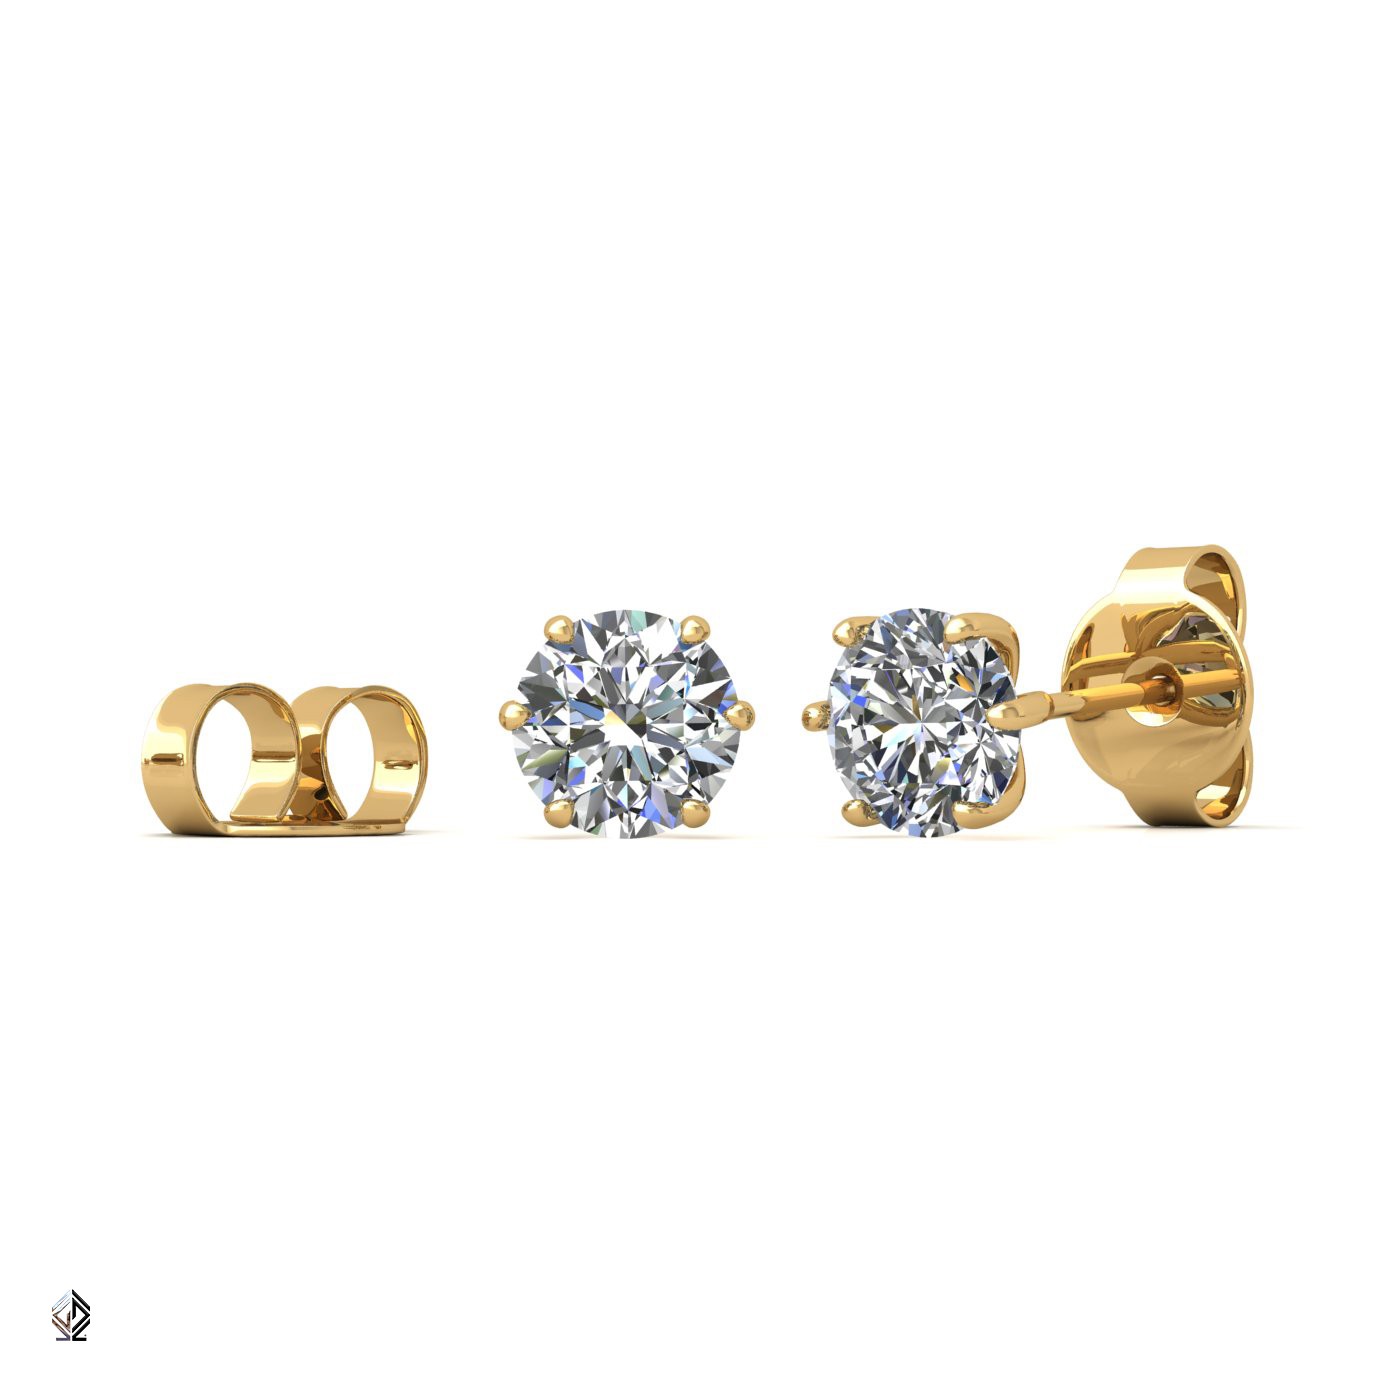 18k yellow gold 2.0 ct each (4,0 tcw) 6 prongs round shape diamond earrings Photos & images